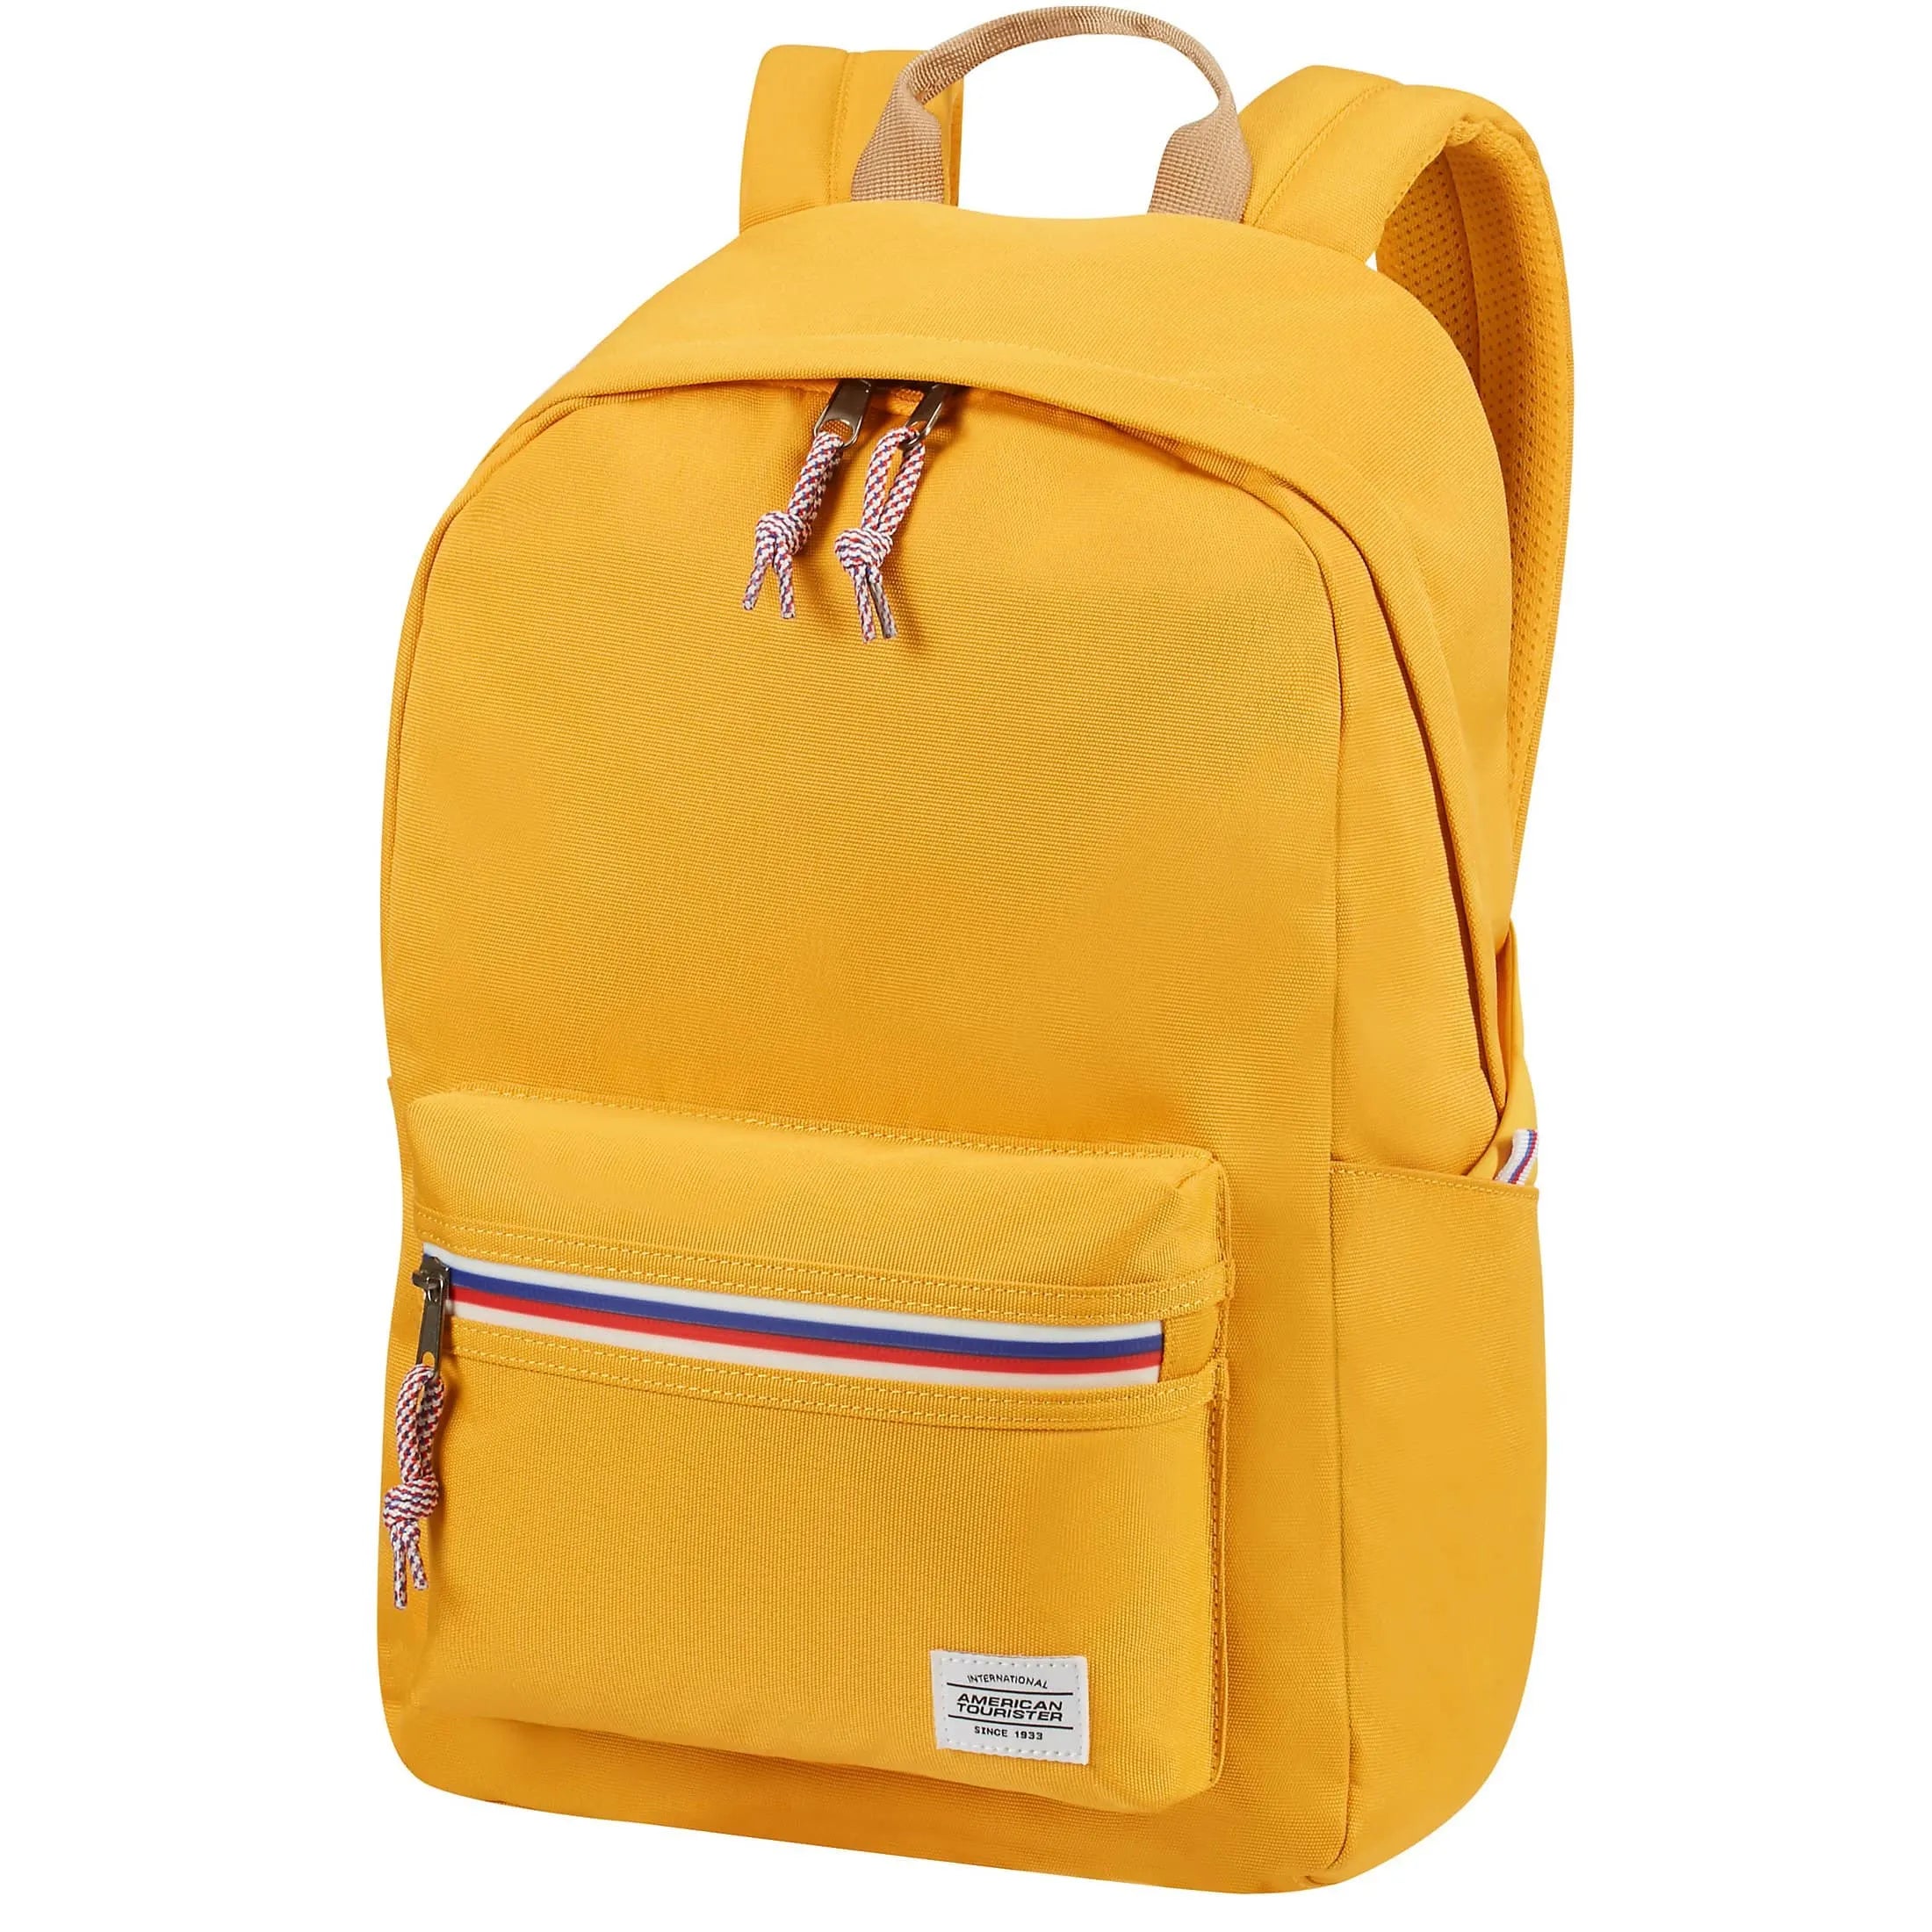 American Tourister Upbeat leisure backpack 42 cm - yellow